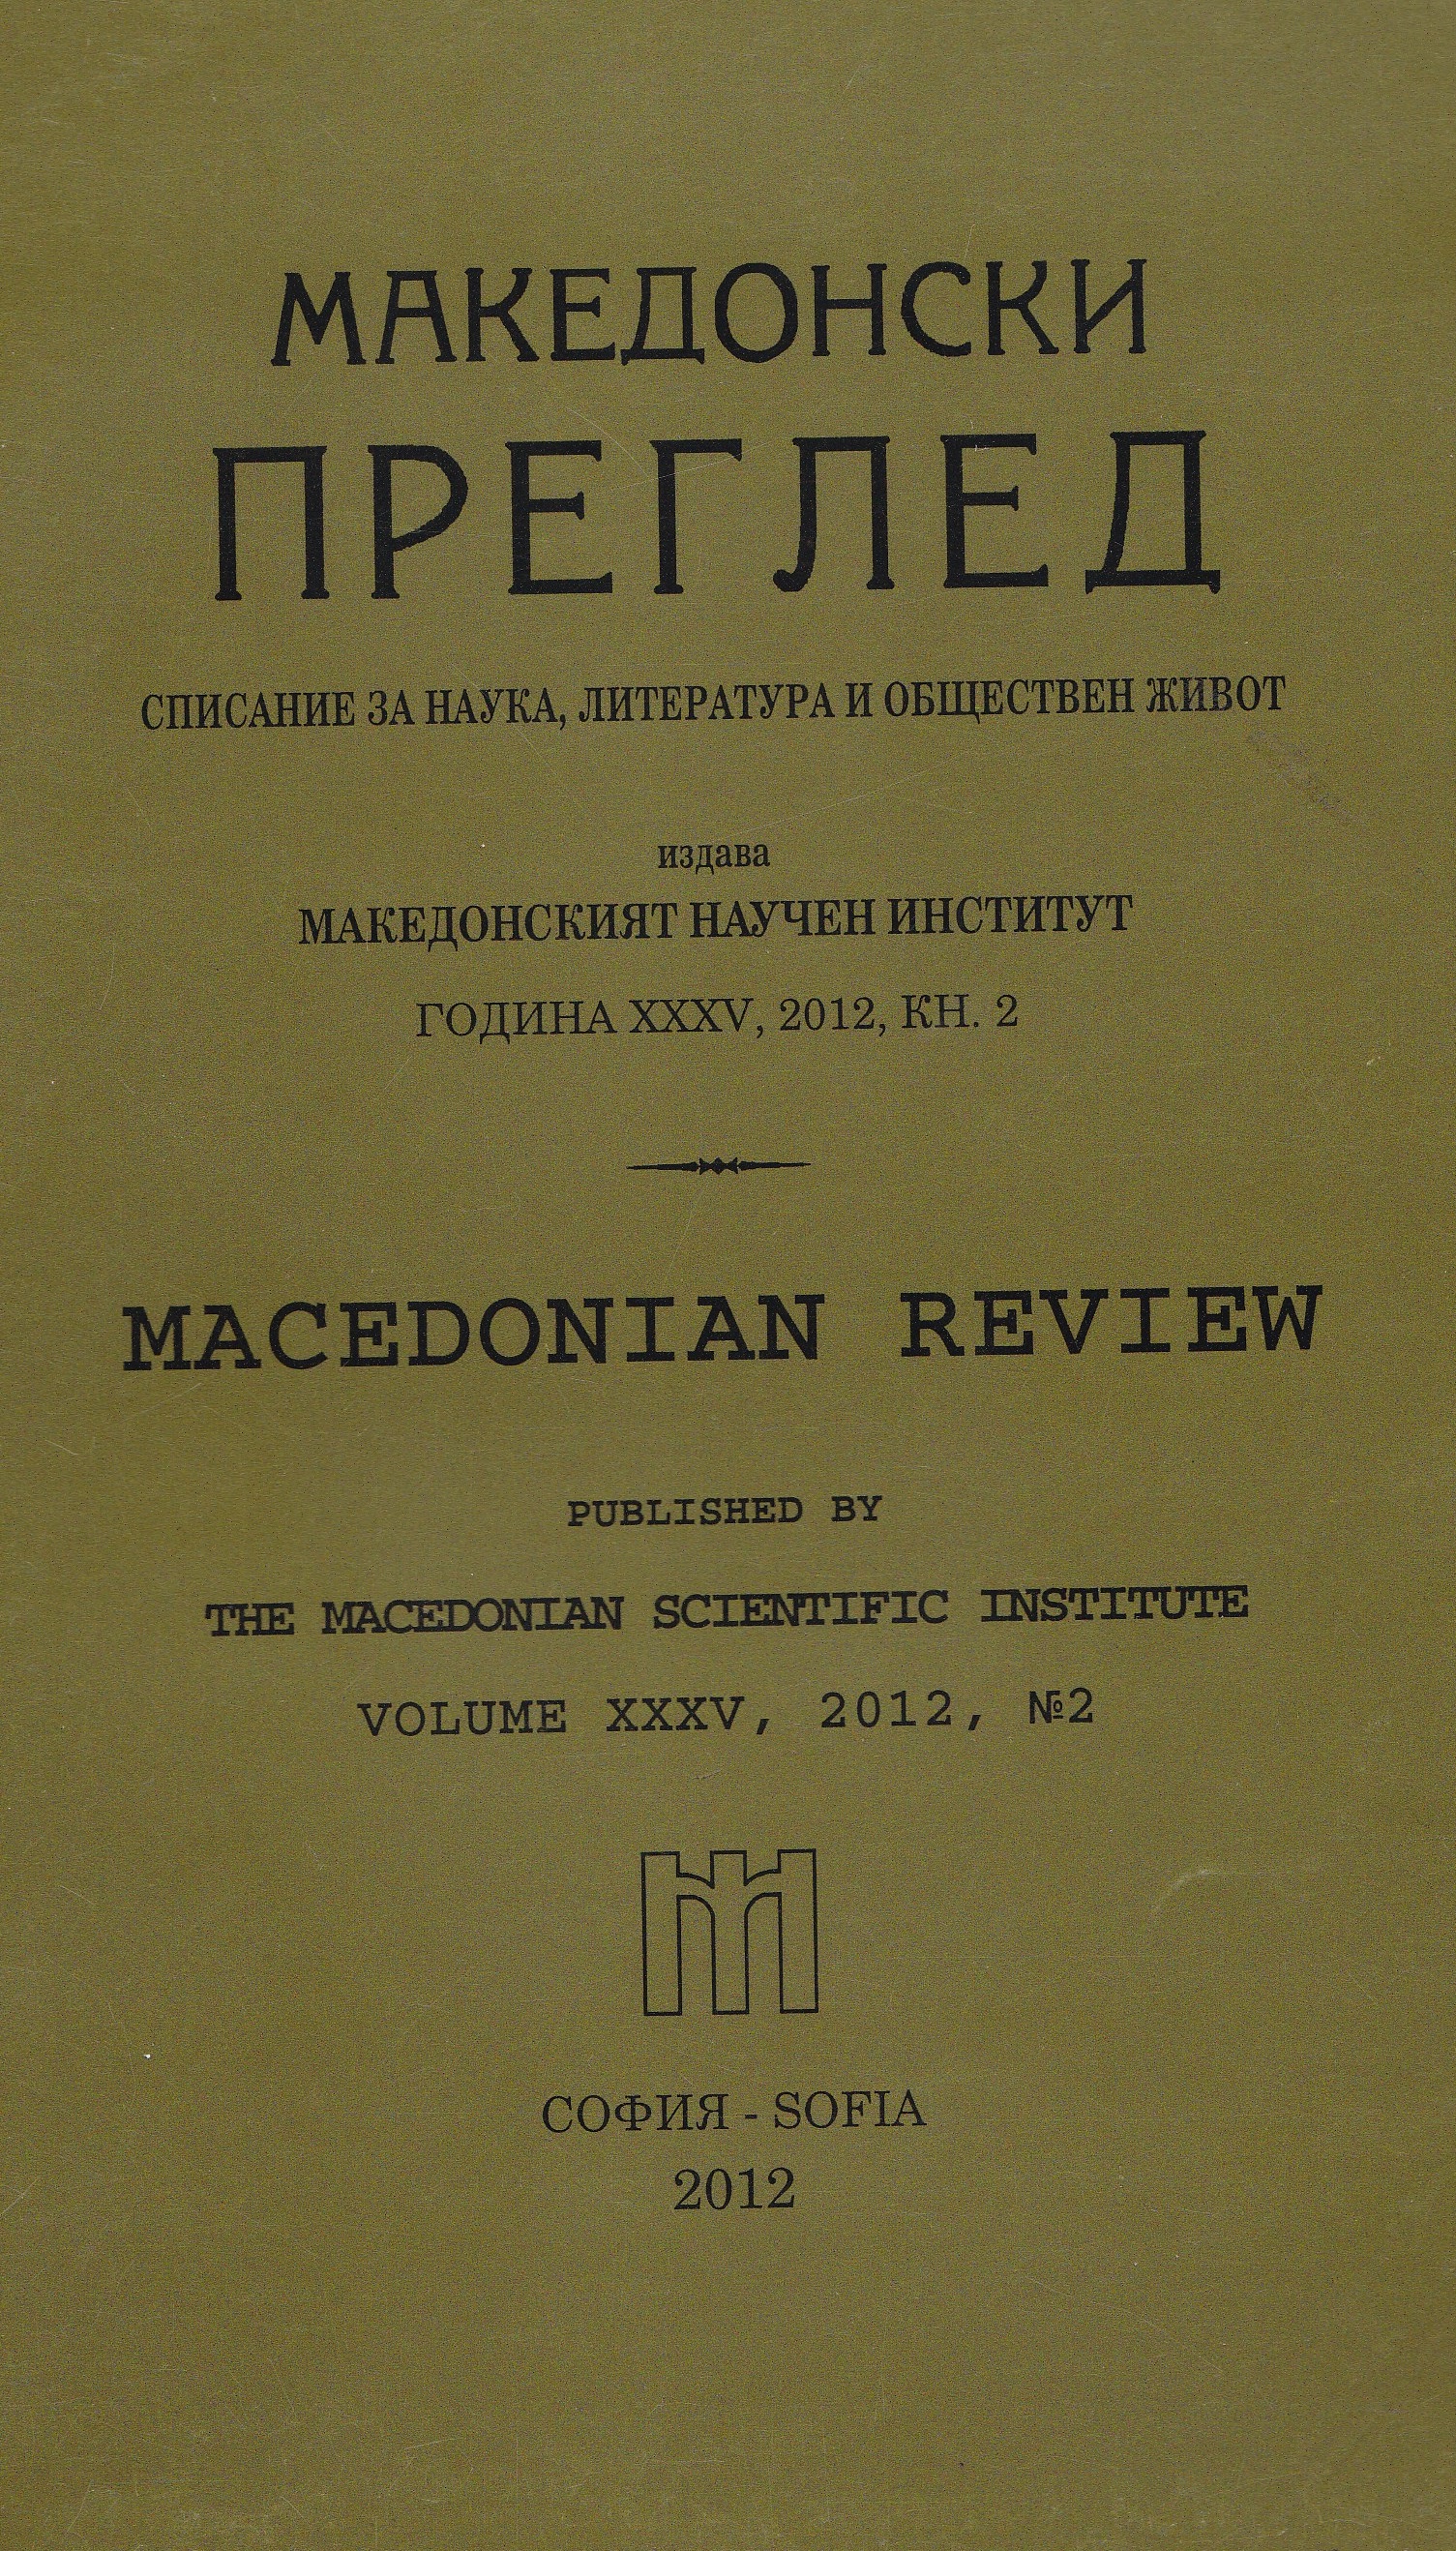 Prof. Stoyan Germanov. Macedonian Question (1944-1989). S., 2012, 340 p. Cover Image